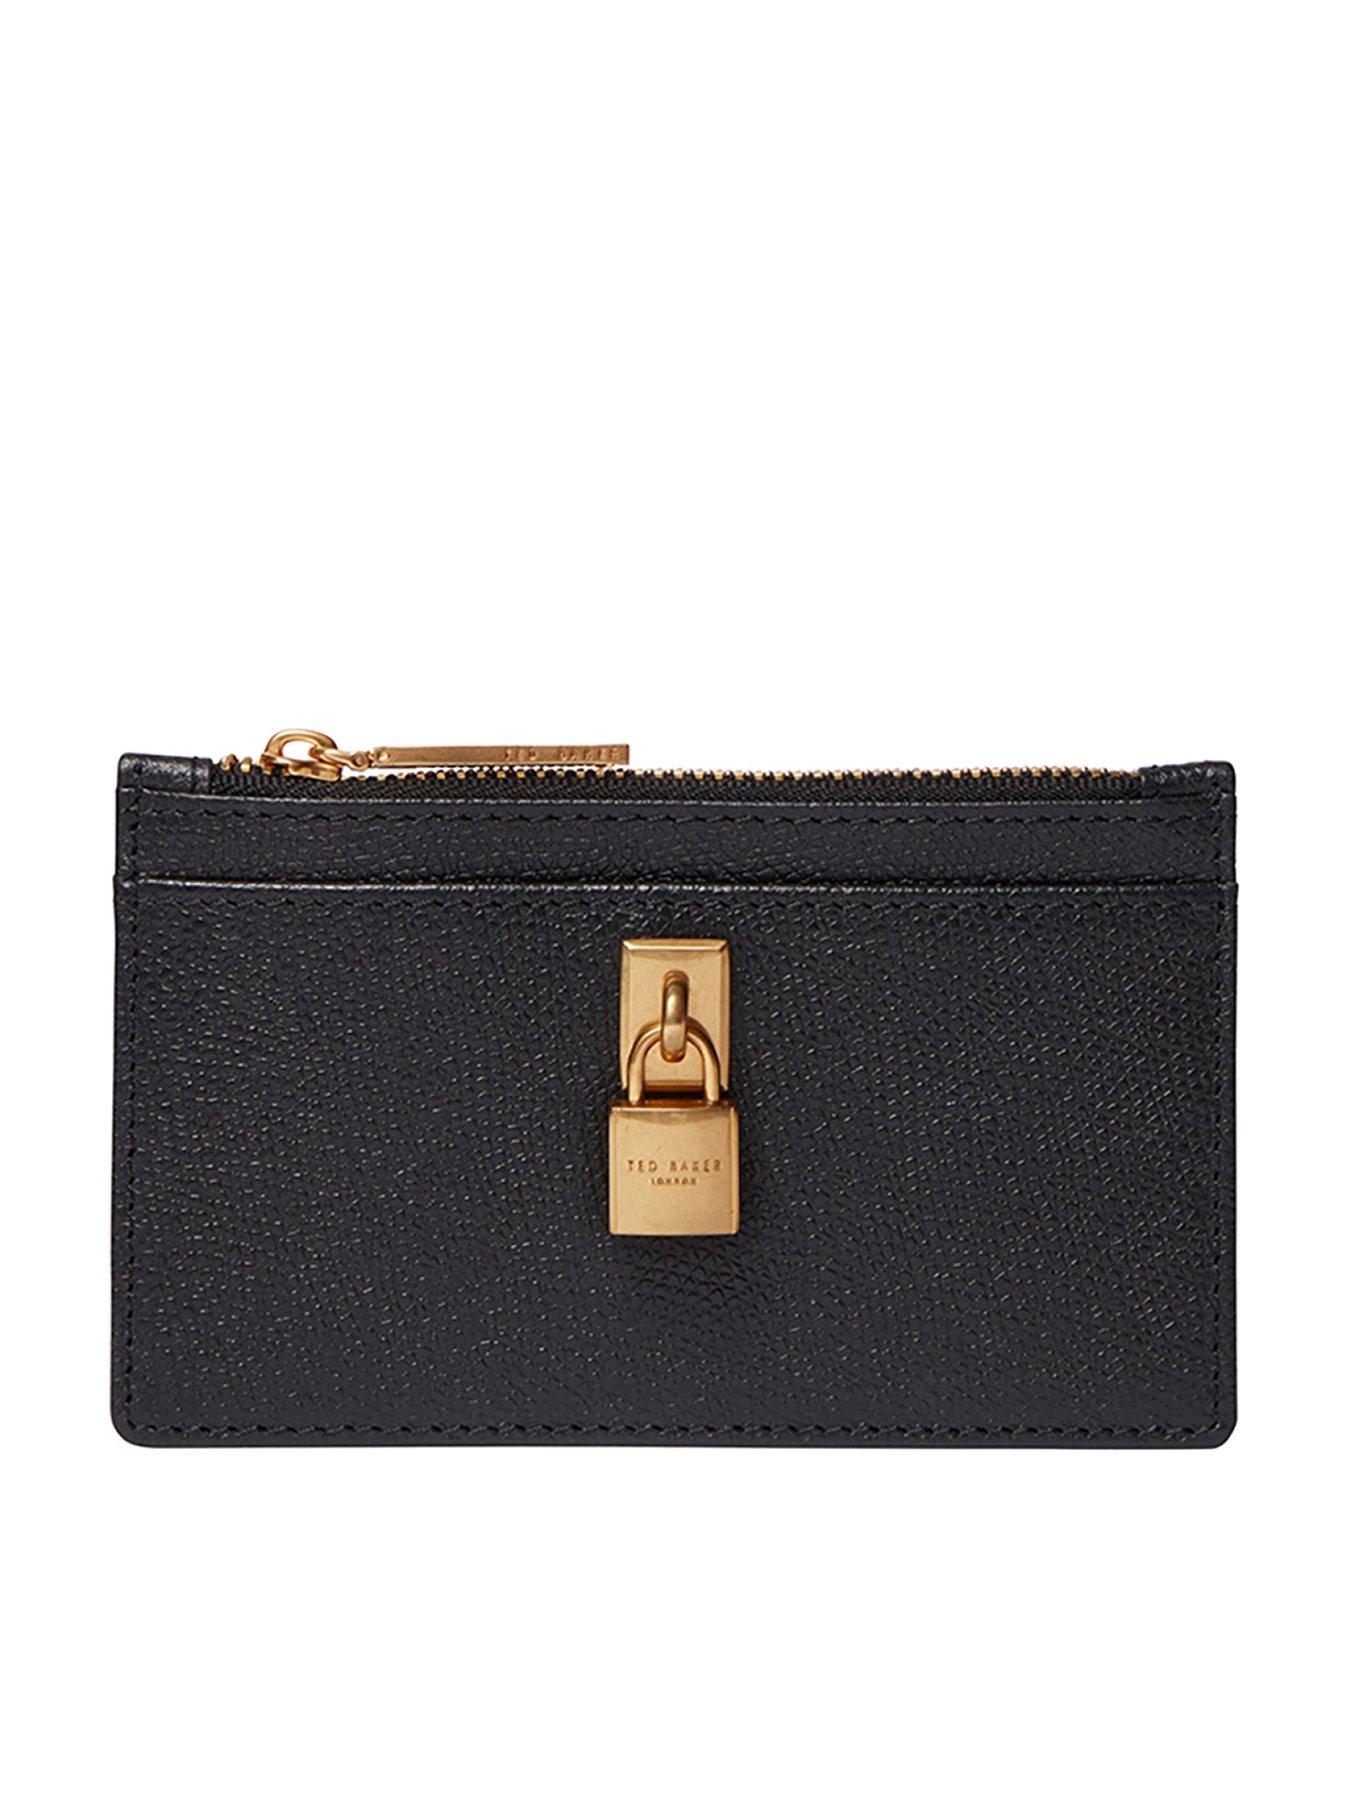 Ted Baker Women's Purses - Save up to 81% | DealDoodle